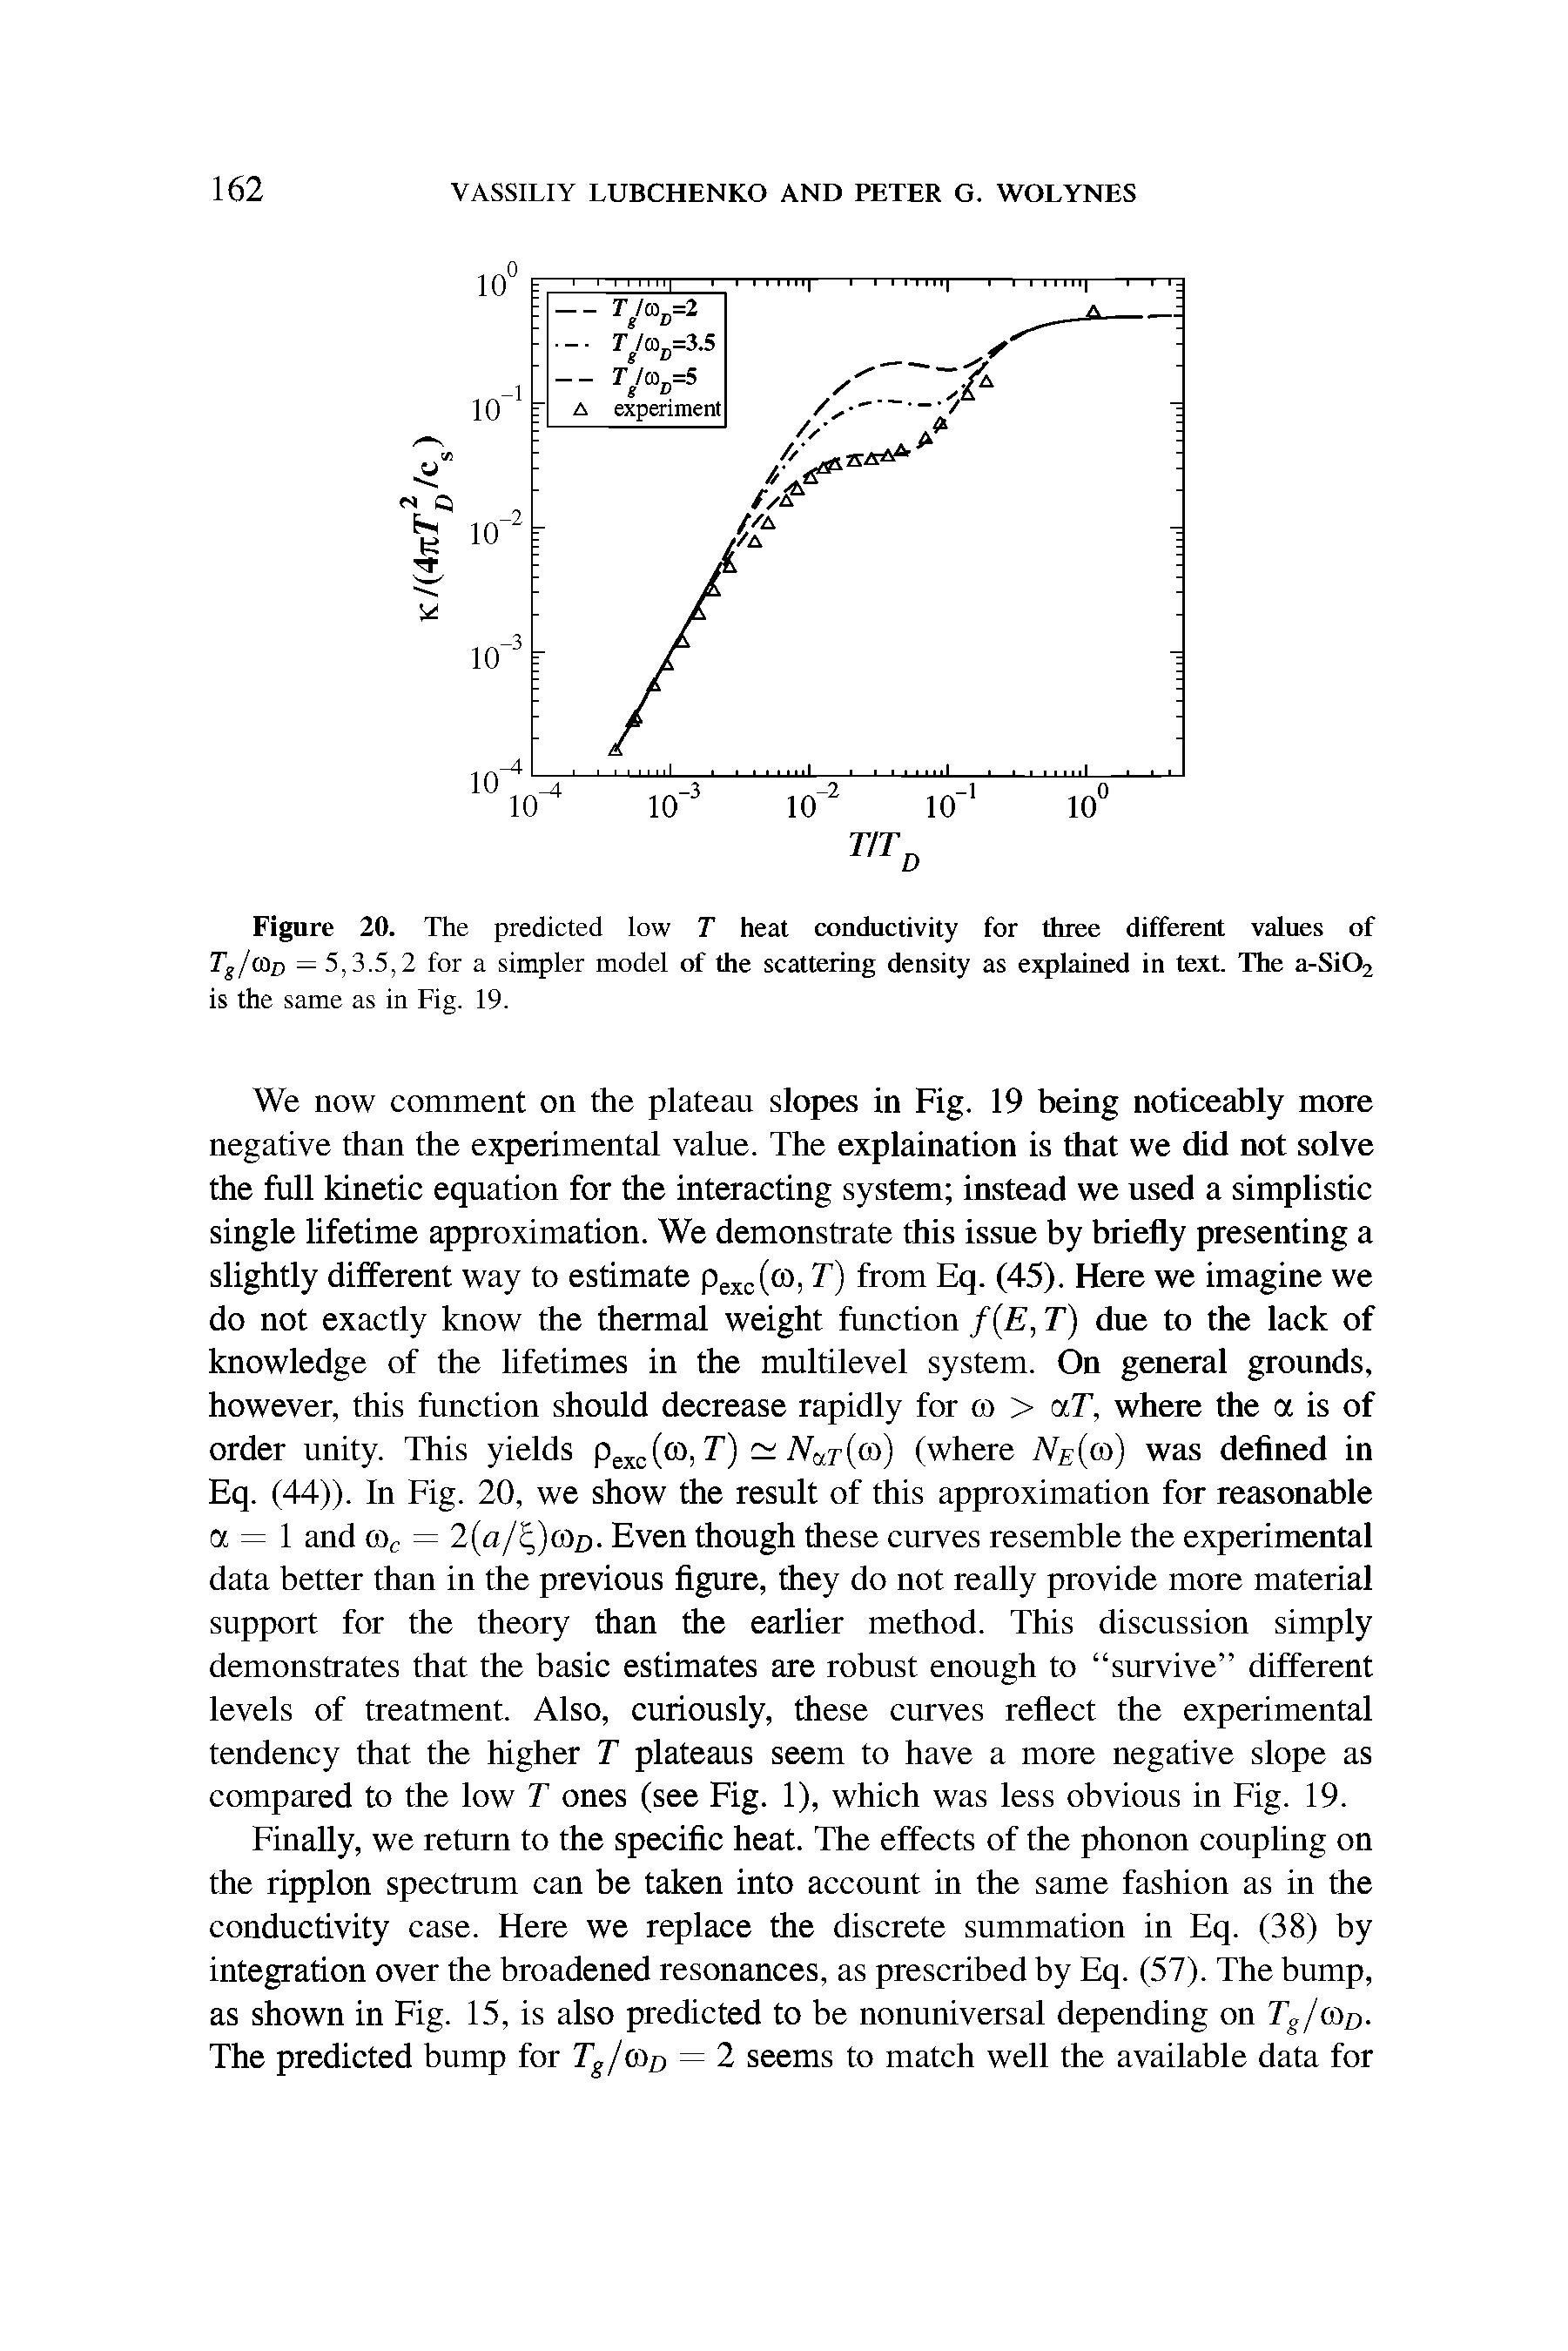 Figure 20. The predicted low T heat conductivity for three different values of Tg/(Ori = 5,3.5,2 for a simpler model of the scattering density as explained in text. The a-Si02 is the same as in Fig. 19.